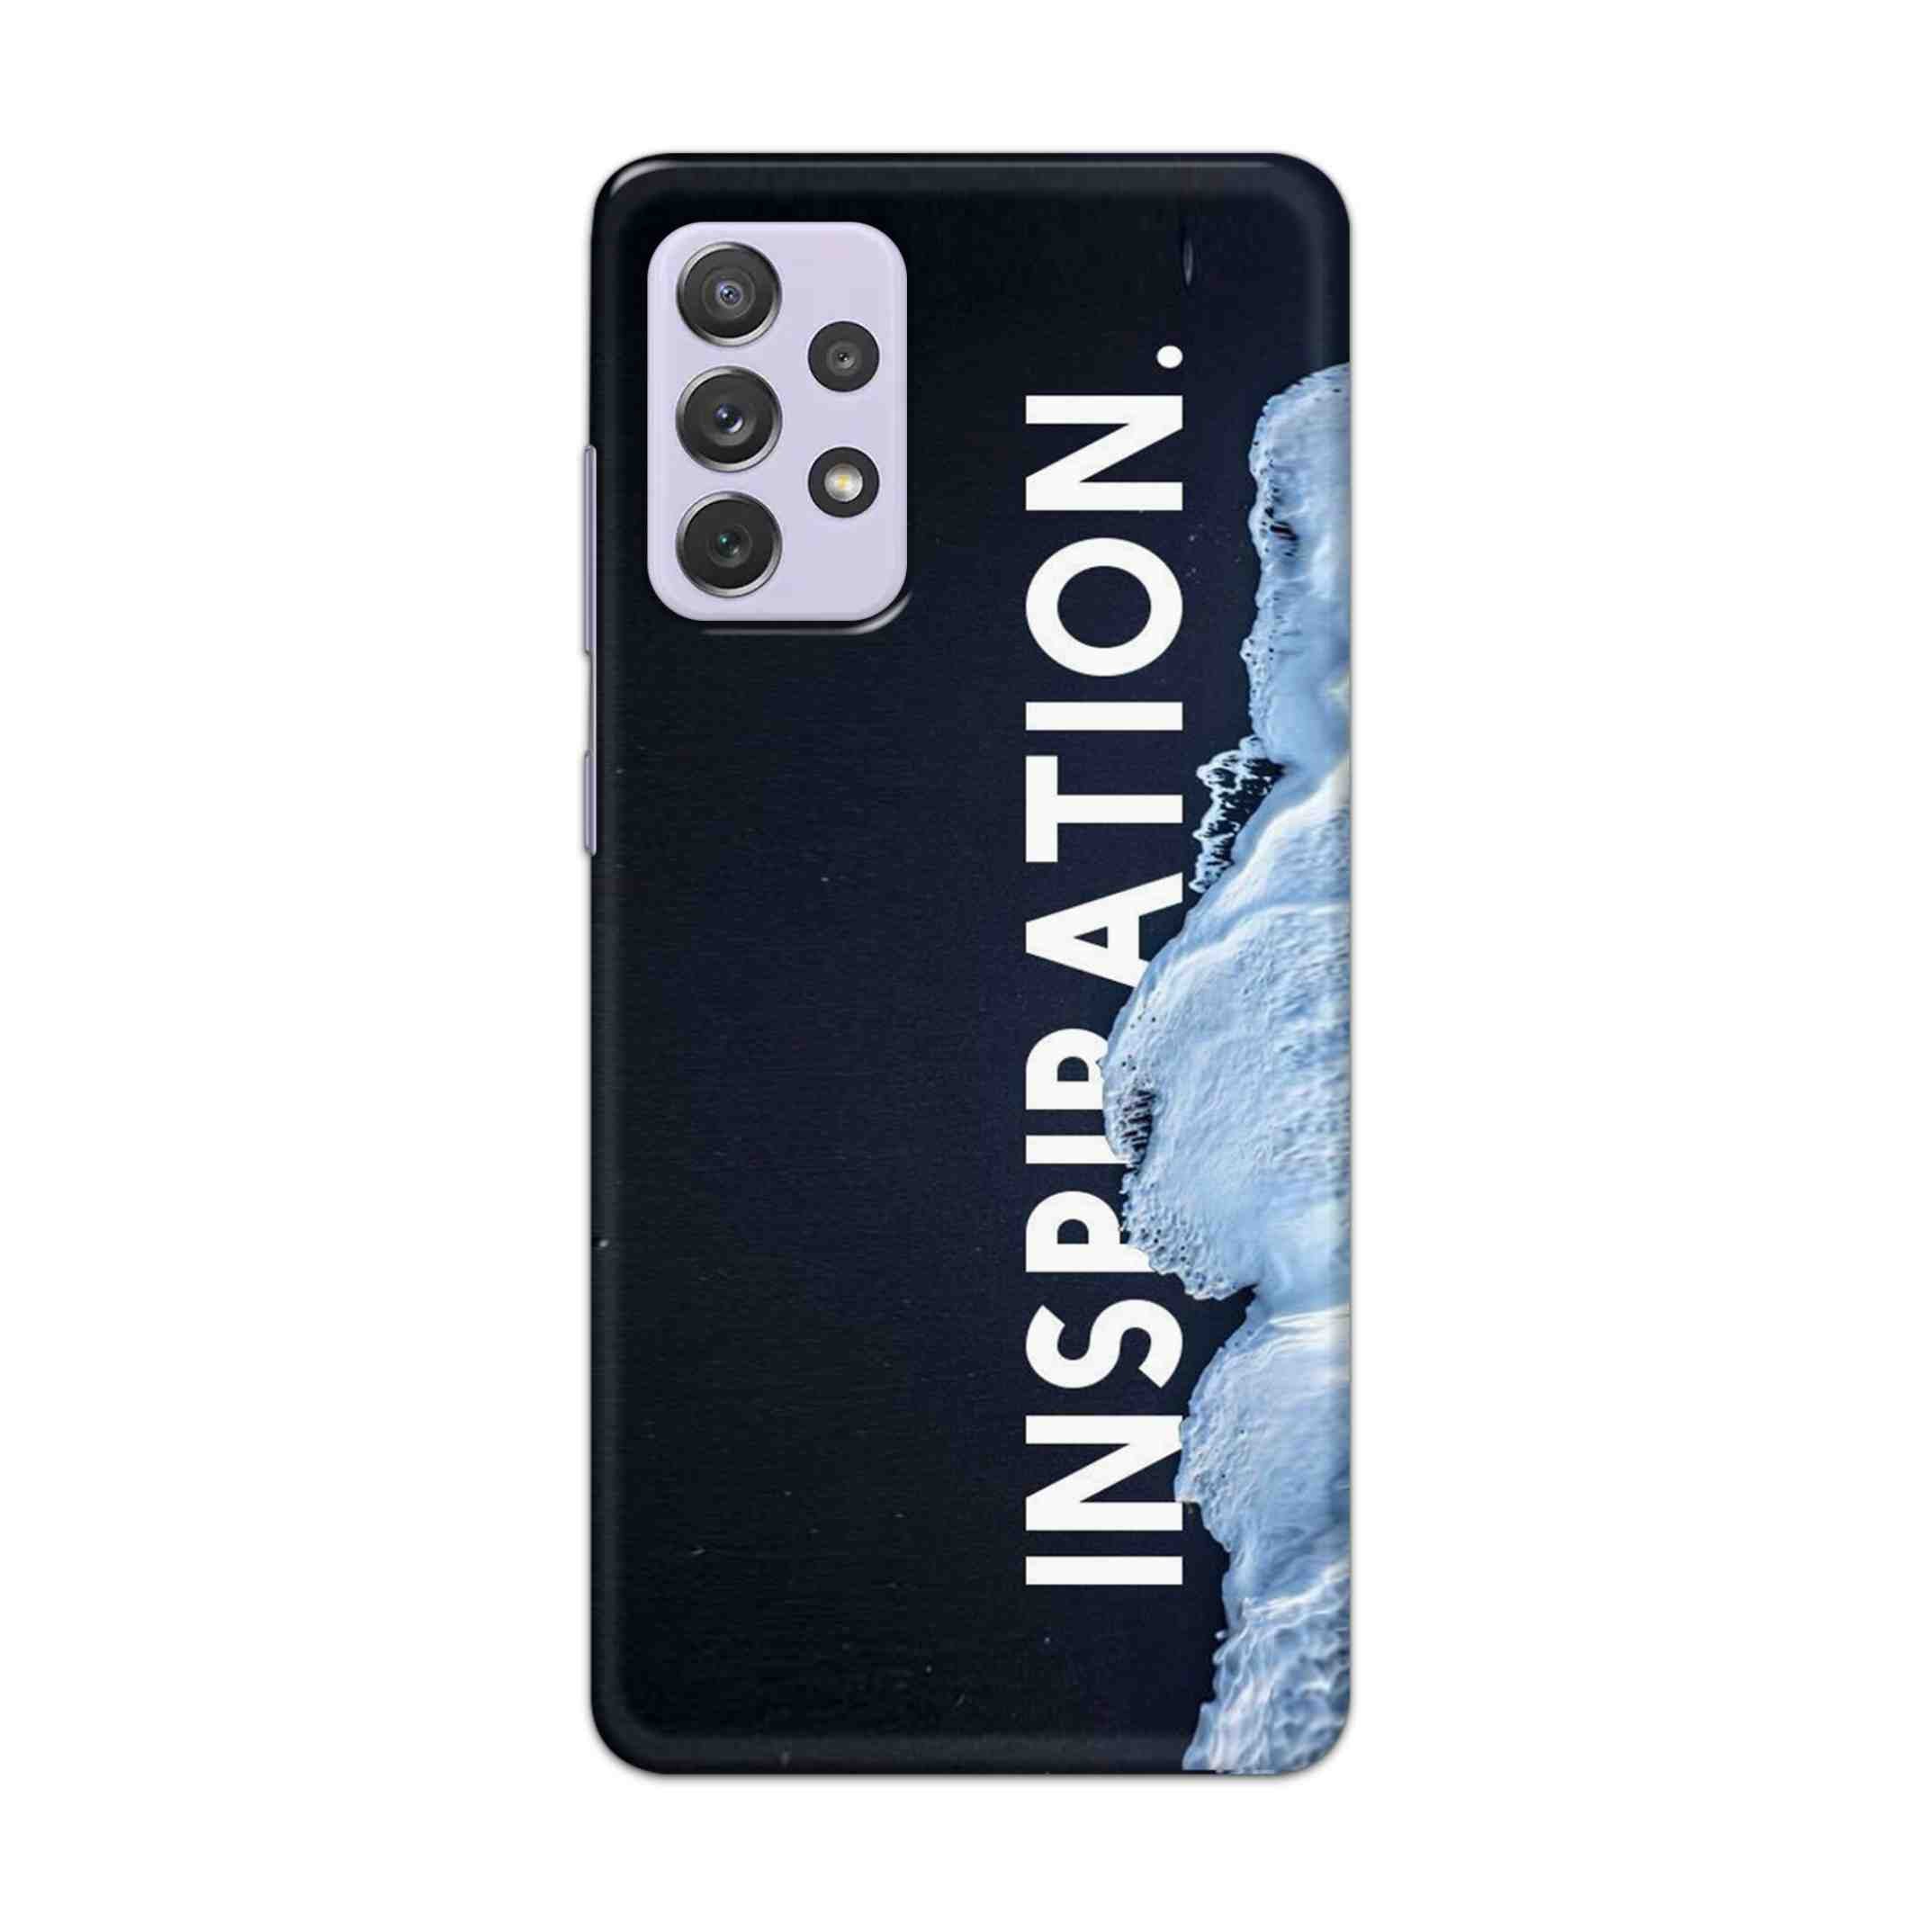 Buy Inspiration Hard Back Mobile Phone Case Cover For Samsung Galaxy A72 Online